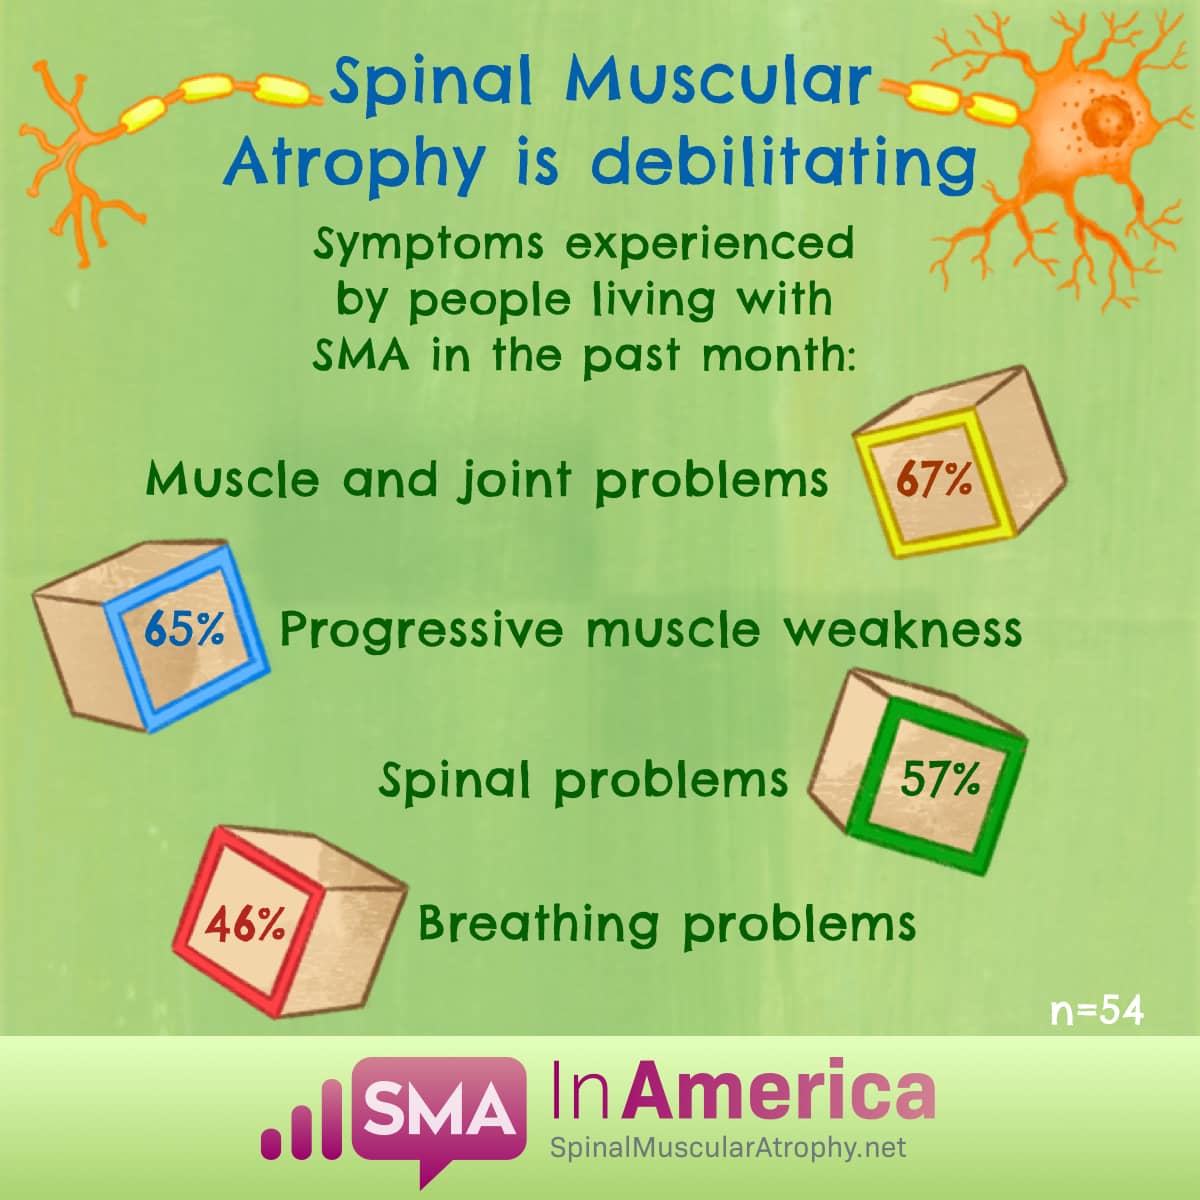 In the past month, 67% of SMA patients experienced muscle and joint problems, 65% progressive muscle weakness, 57% spinal problems, 46% breathing problems.